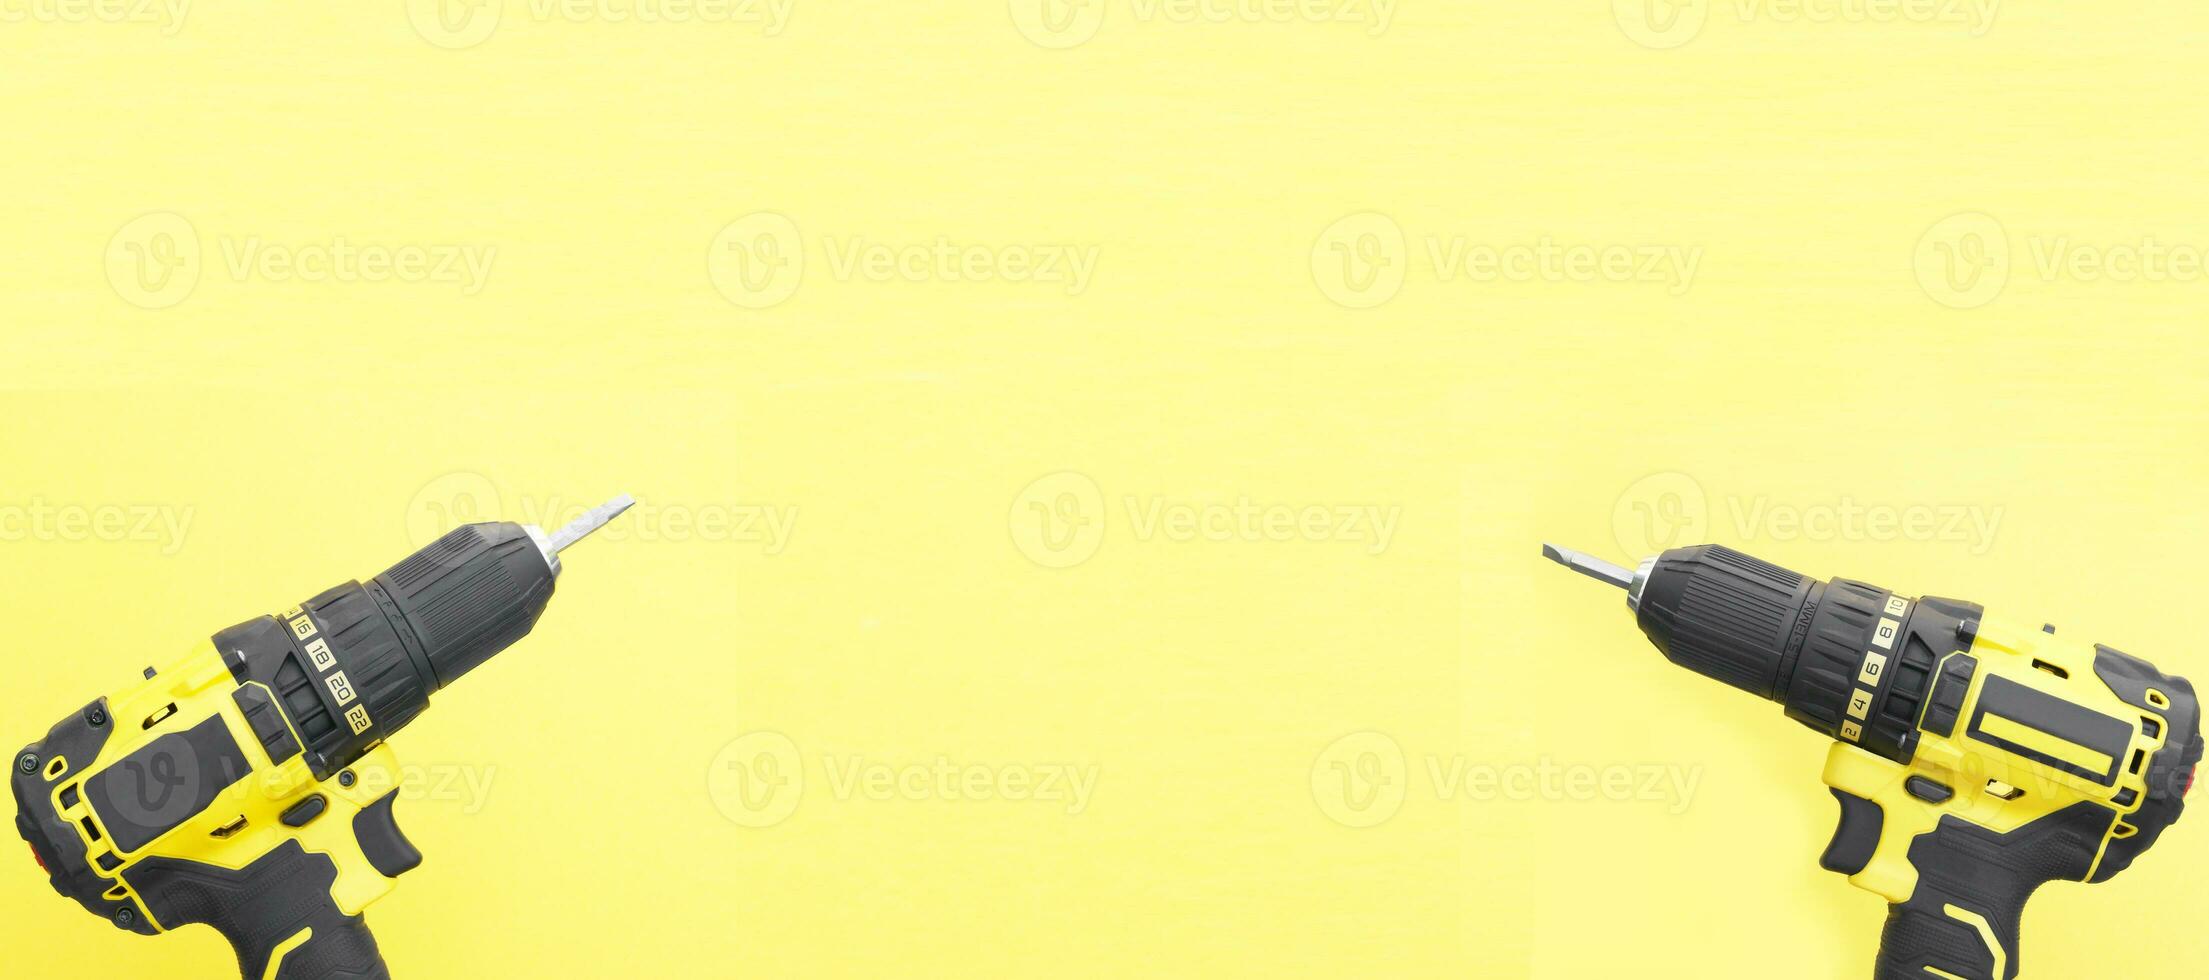 Yhe yellow-black screwdriver on a yellow background. photo